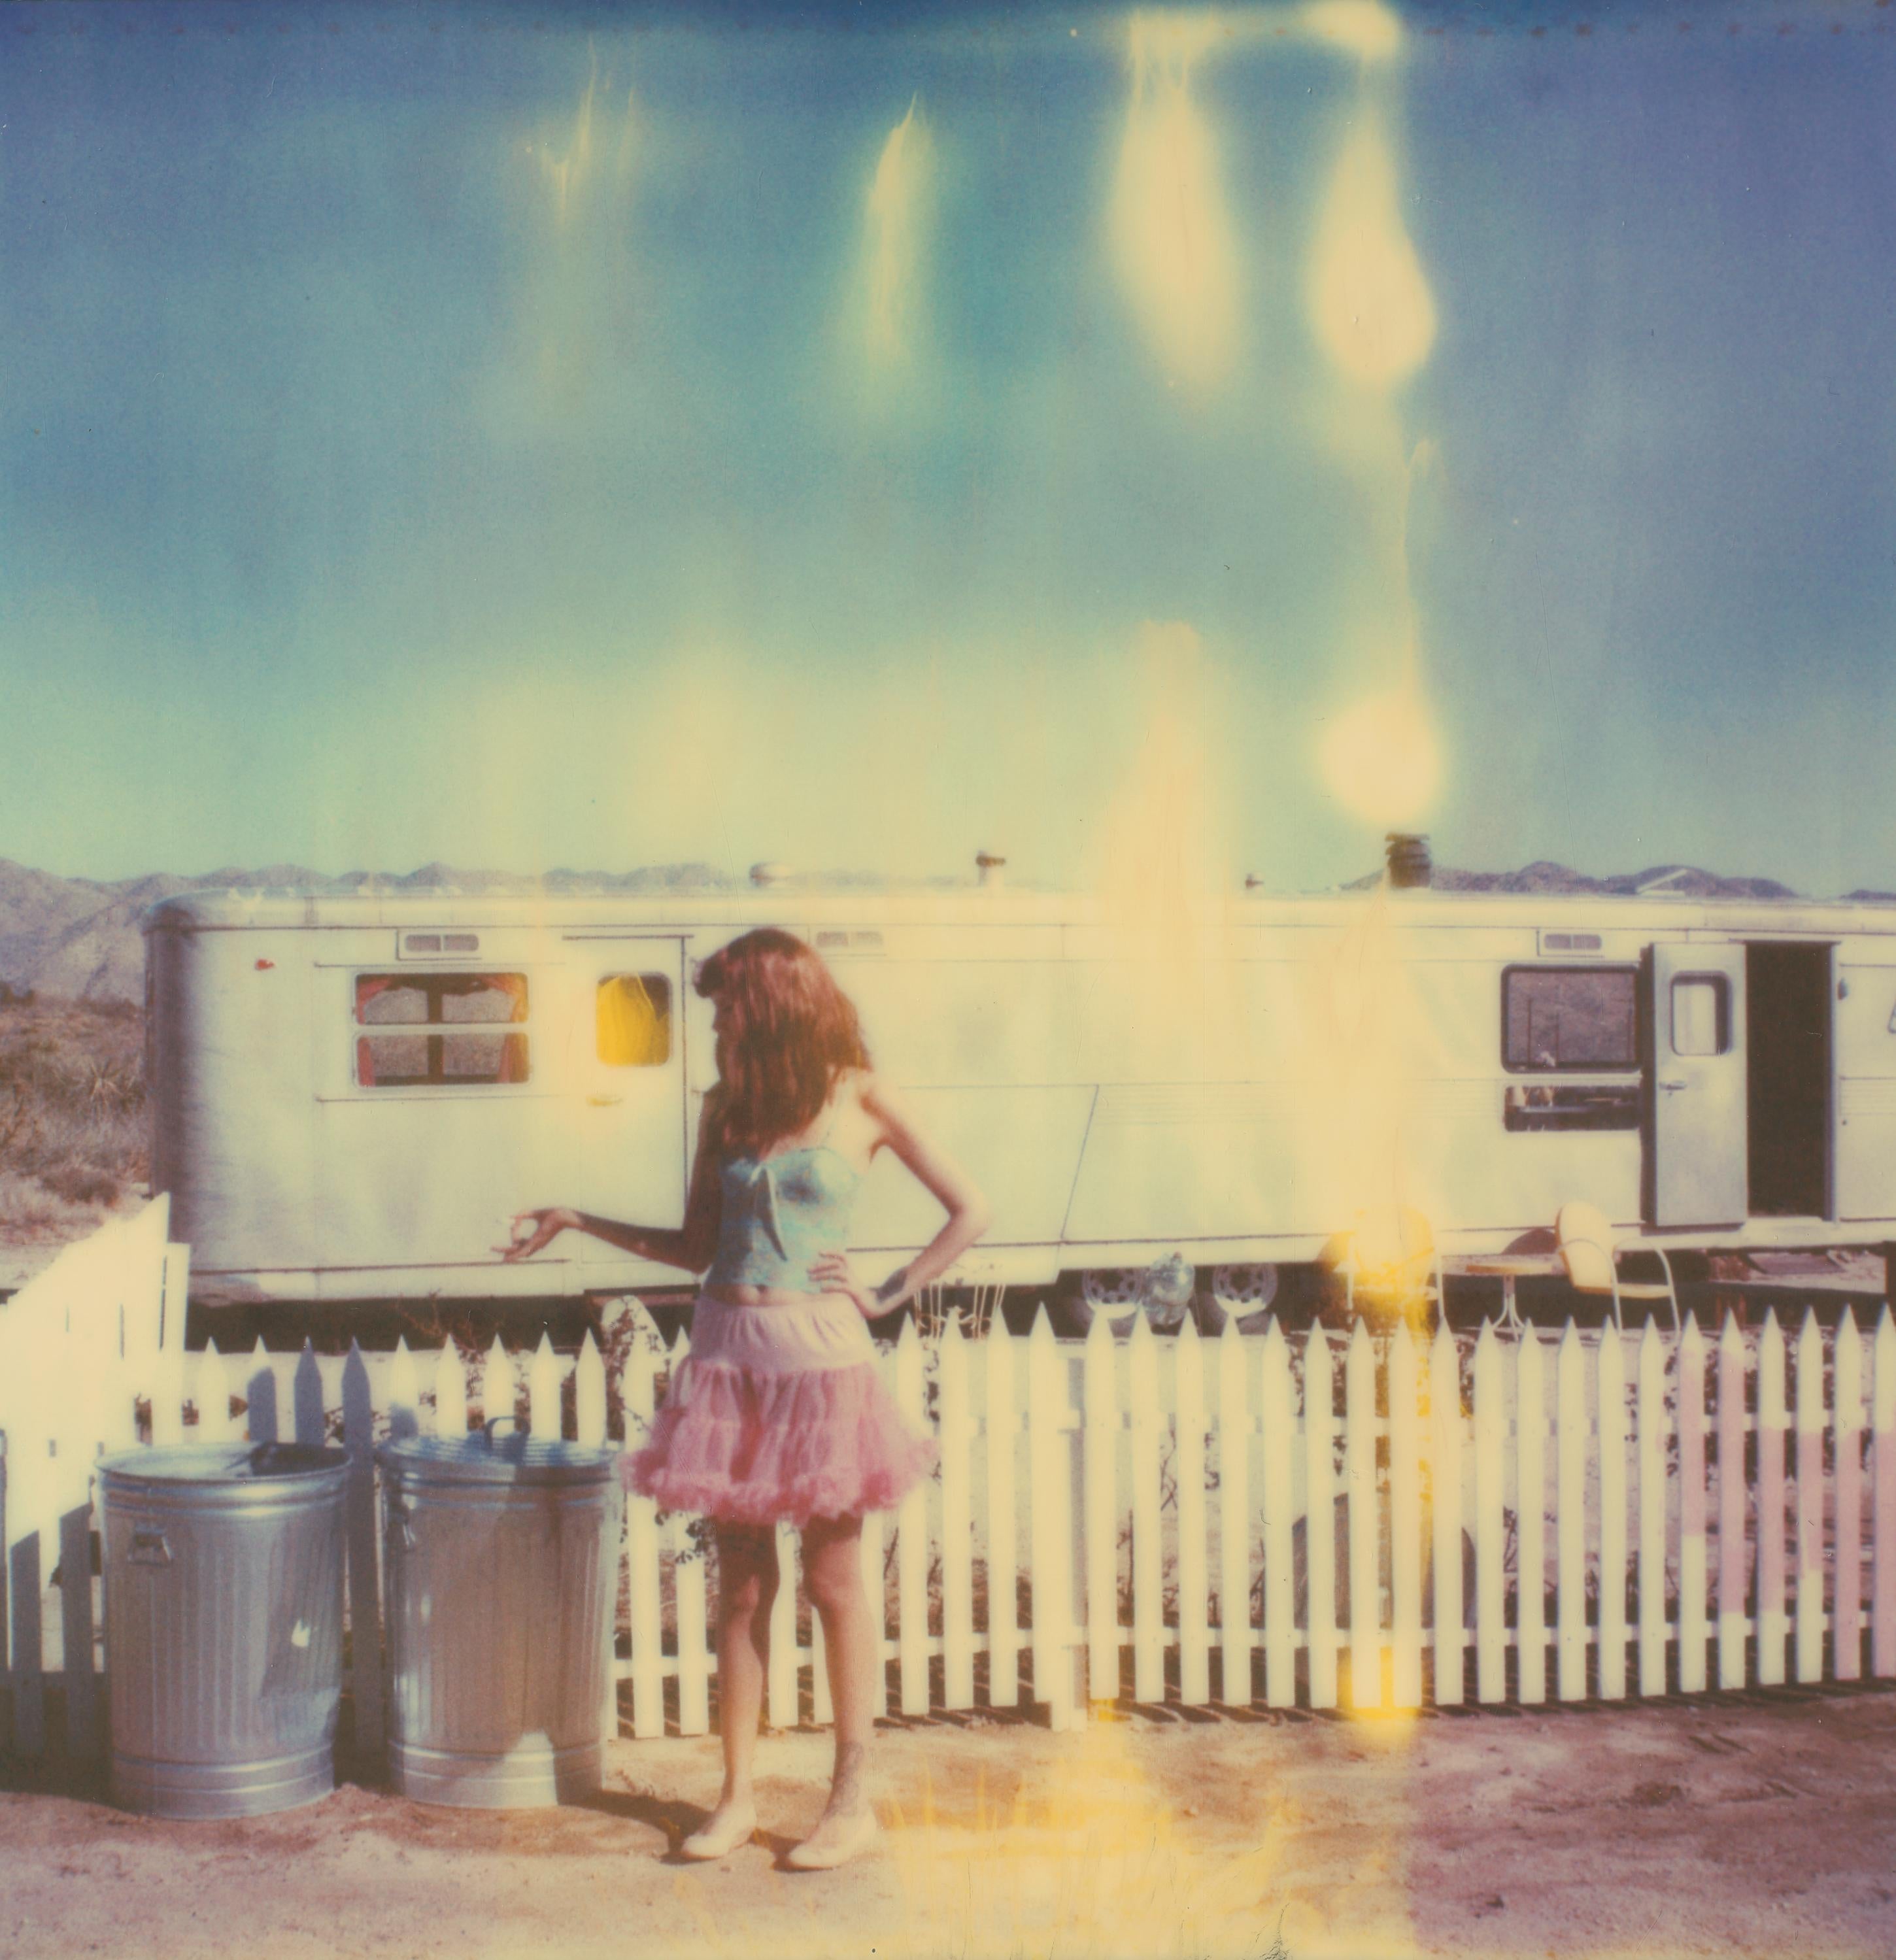 Stefanie Schneider Figurative Photograph - Making Magic (The Girl behind the White Picket Fence)